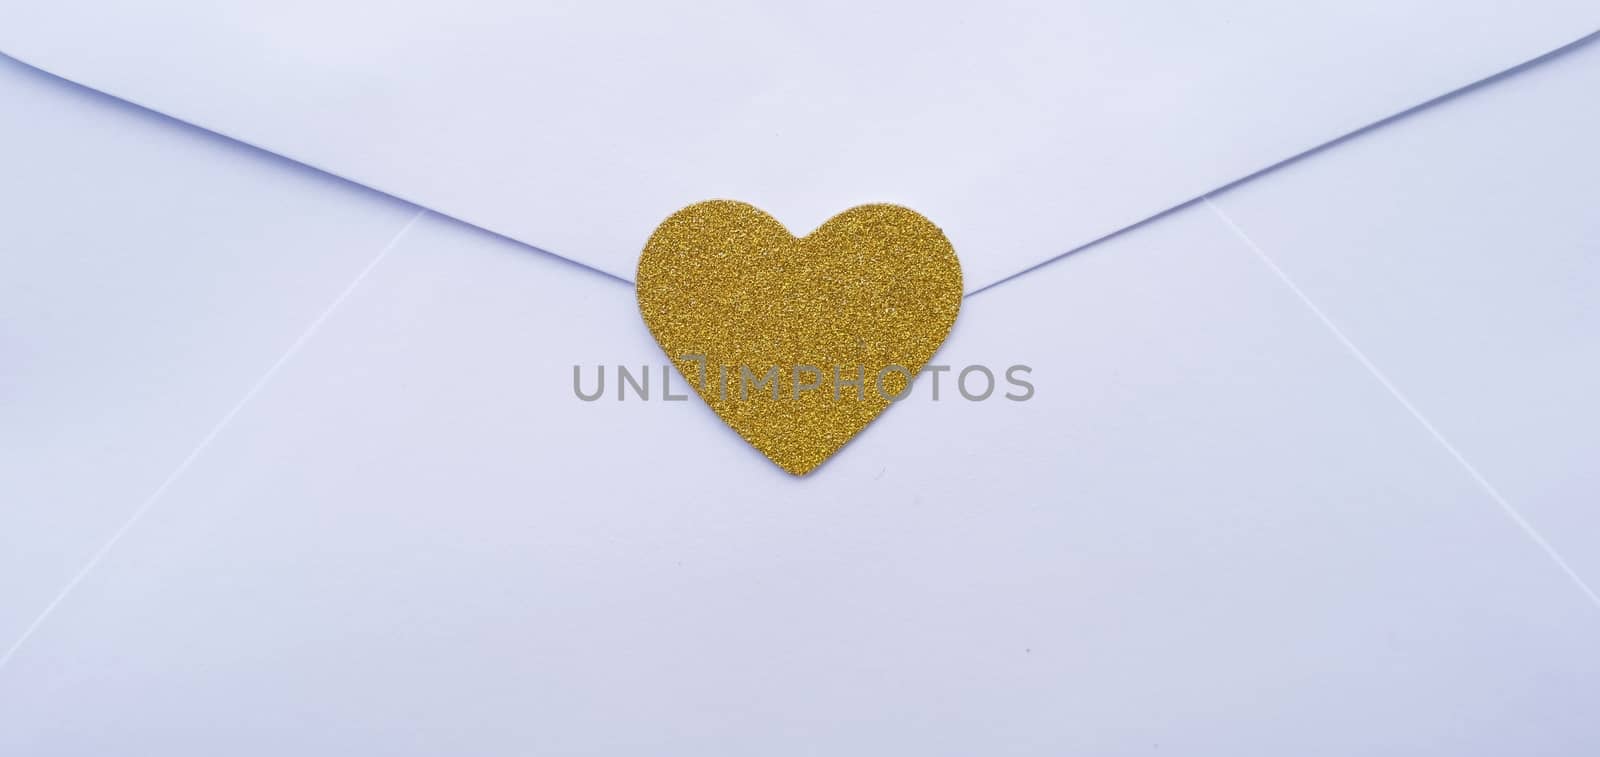 Valentine's day love letter envelope with hearts on wooden backg by peandben